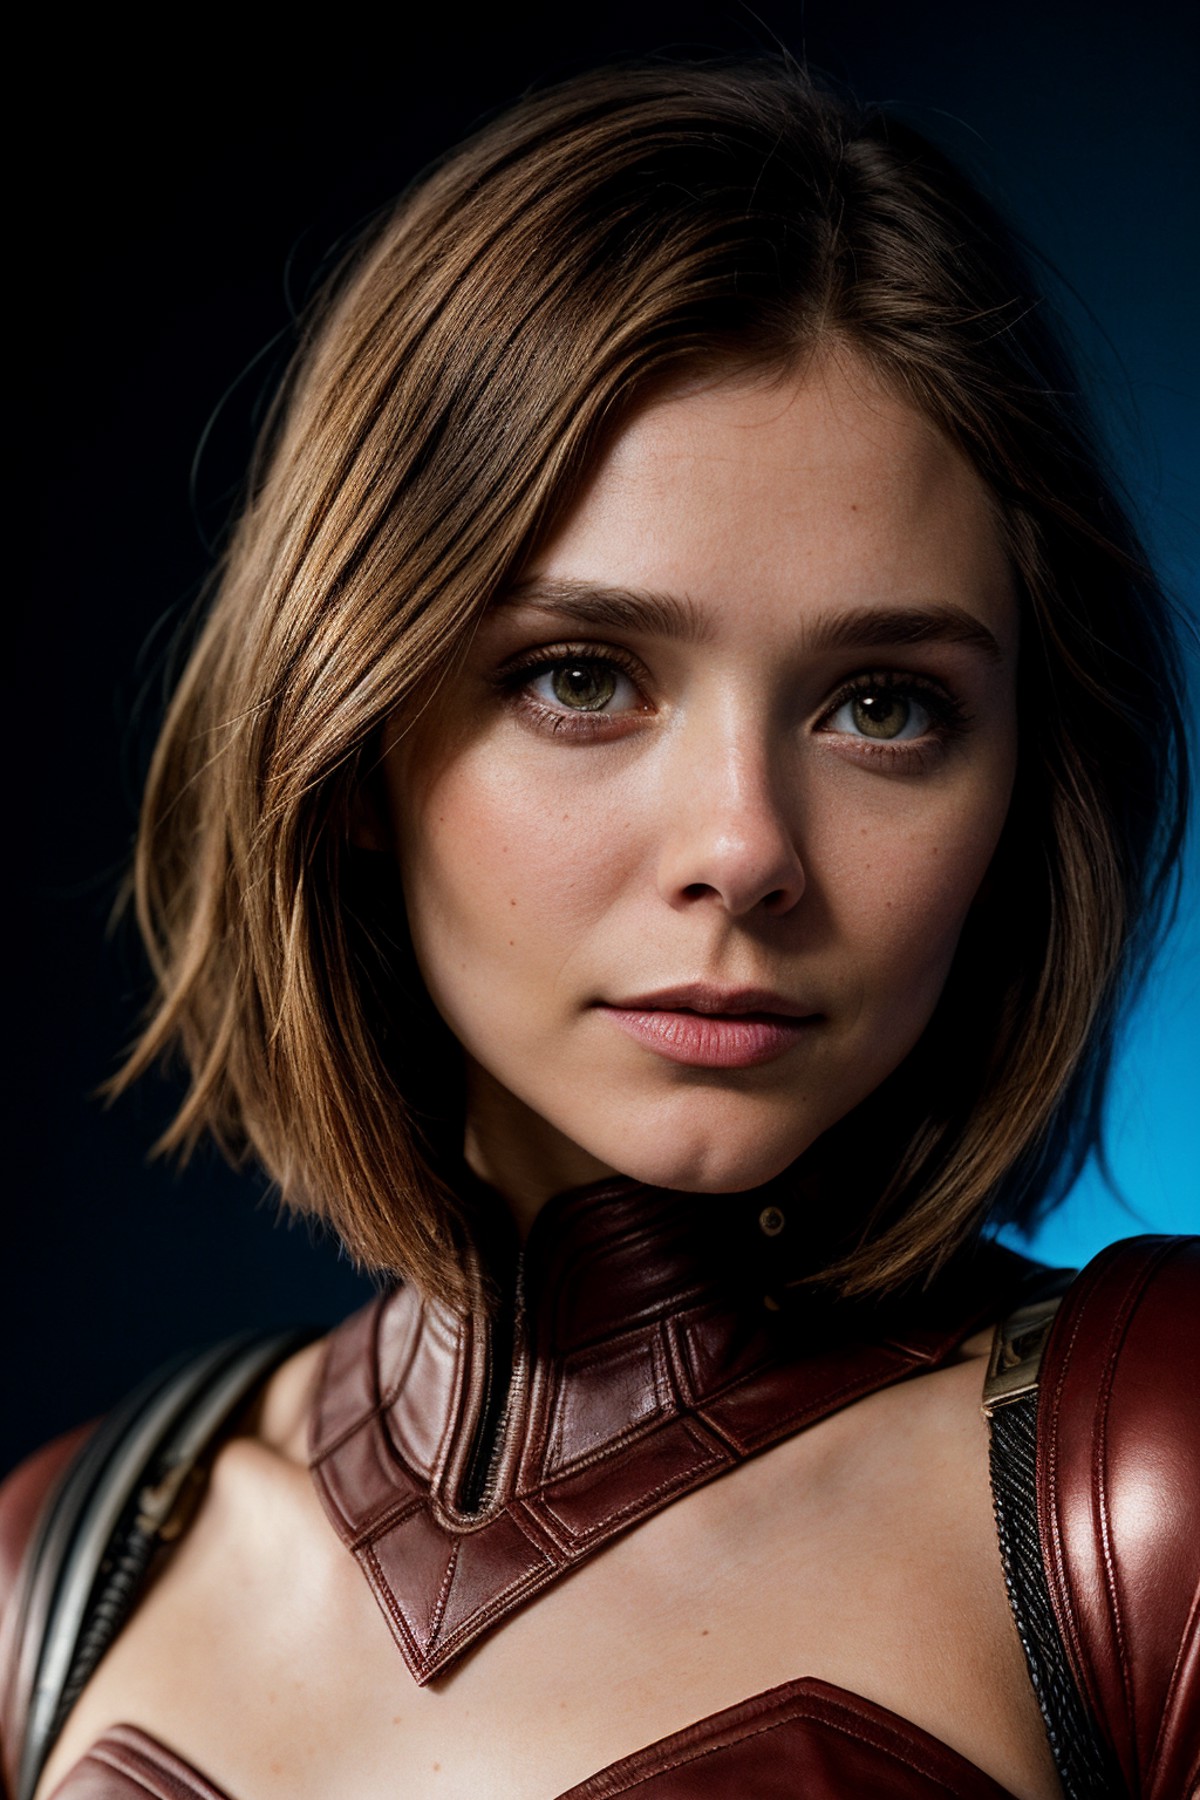 photo of (el10lsen-130:0.99), closeup portrait, perfect short hair, (modern photo, red leather superhero outfit), 24mm, (a...